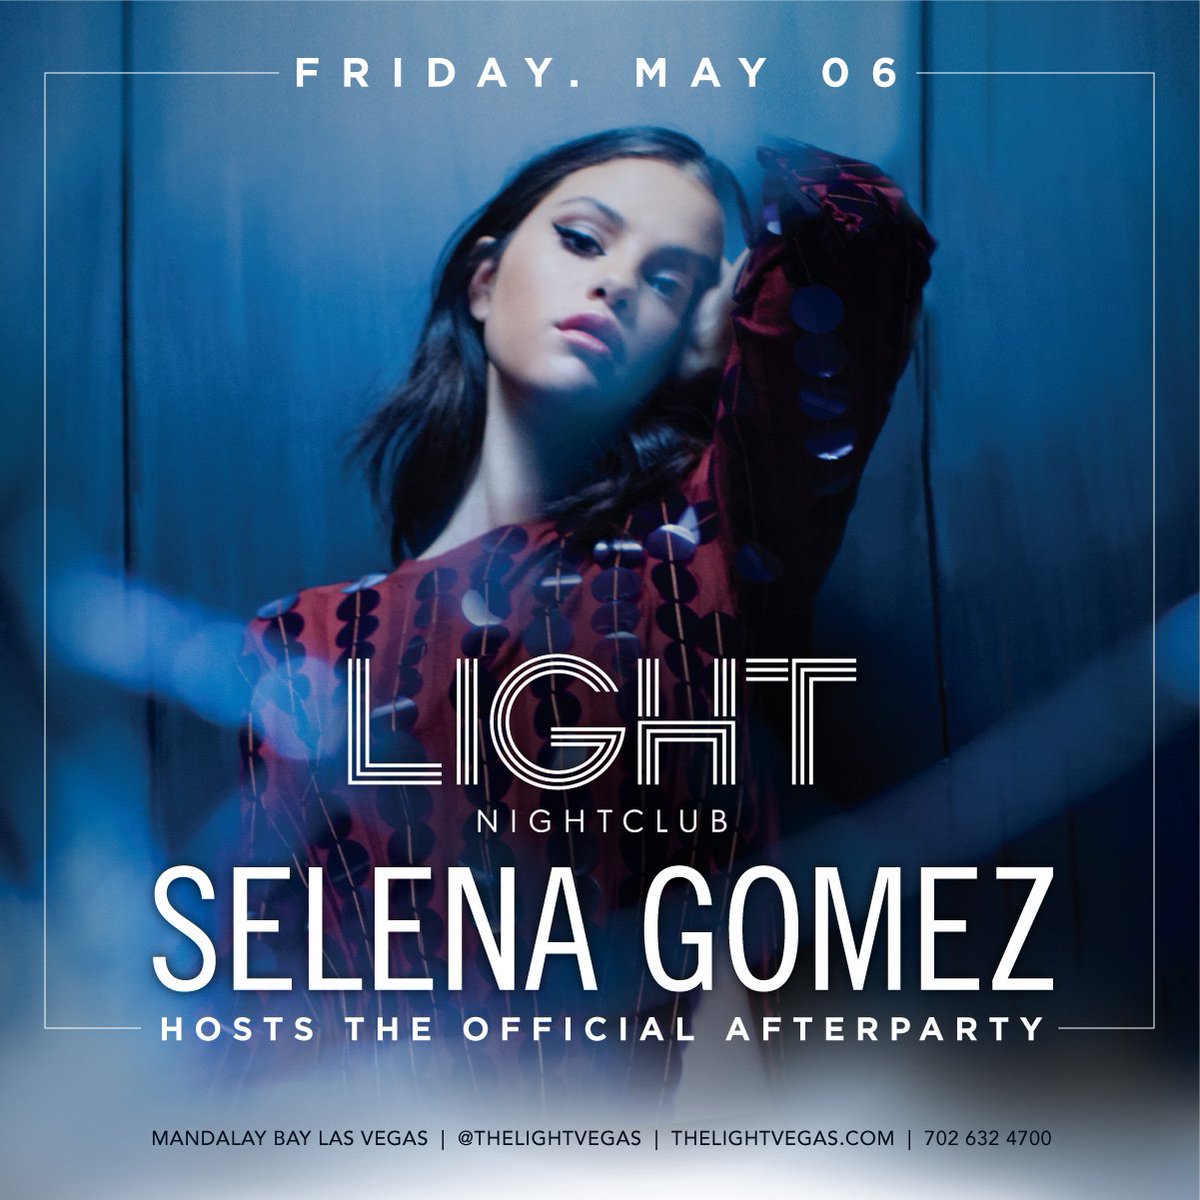 Hosting the official party after my concert in Vegas on May 6 at @thelightvegas! https://t.co/Rtmzymk7C9 https://t.co/3K5P30wxj0